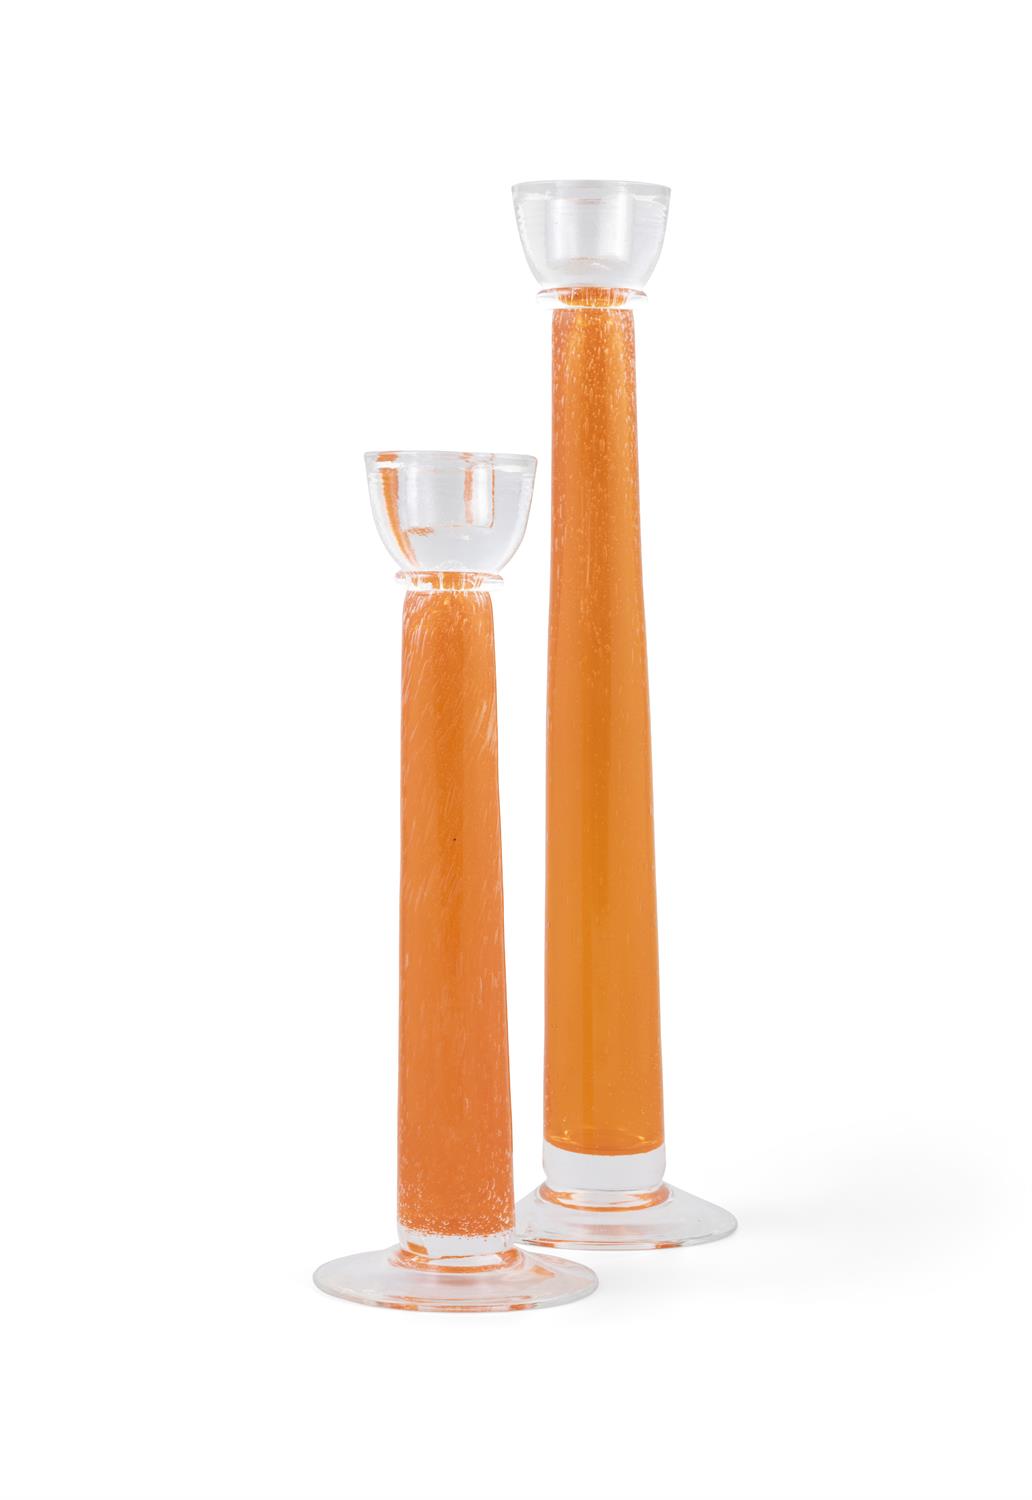 CANDLE STICKS A pair of orange and clear glass candle sticks of differing heights. Italy. 39. - Image 2 of 3